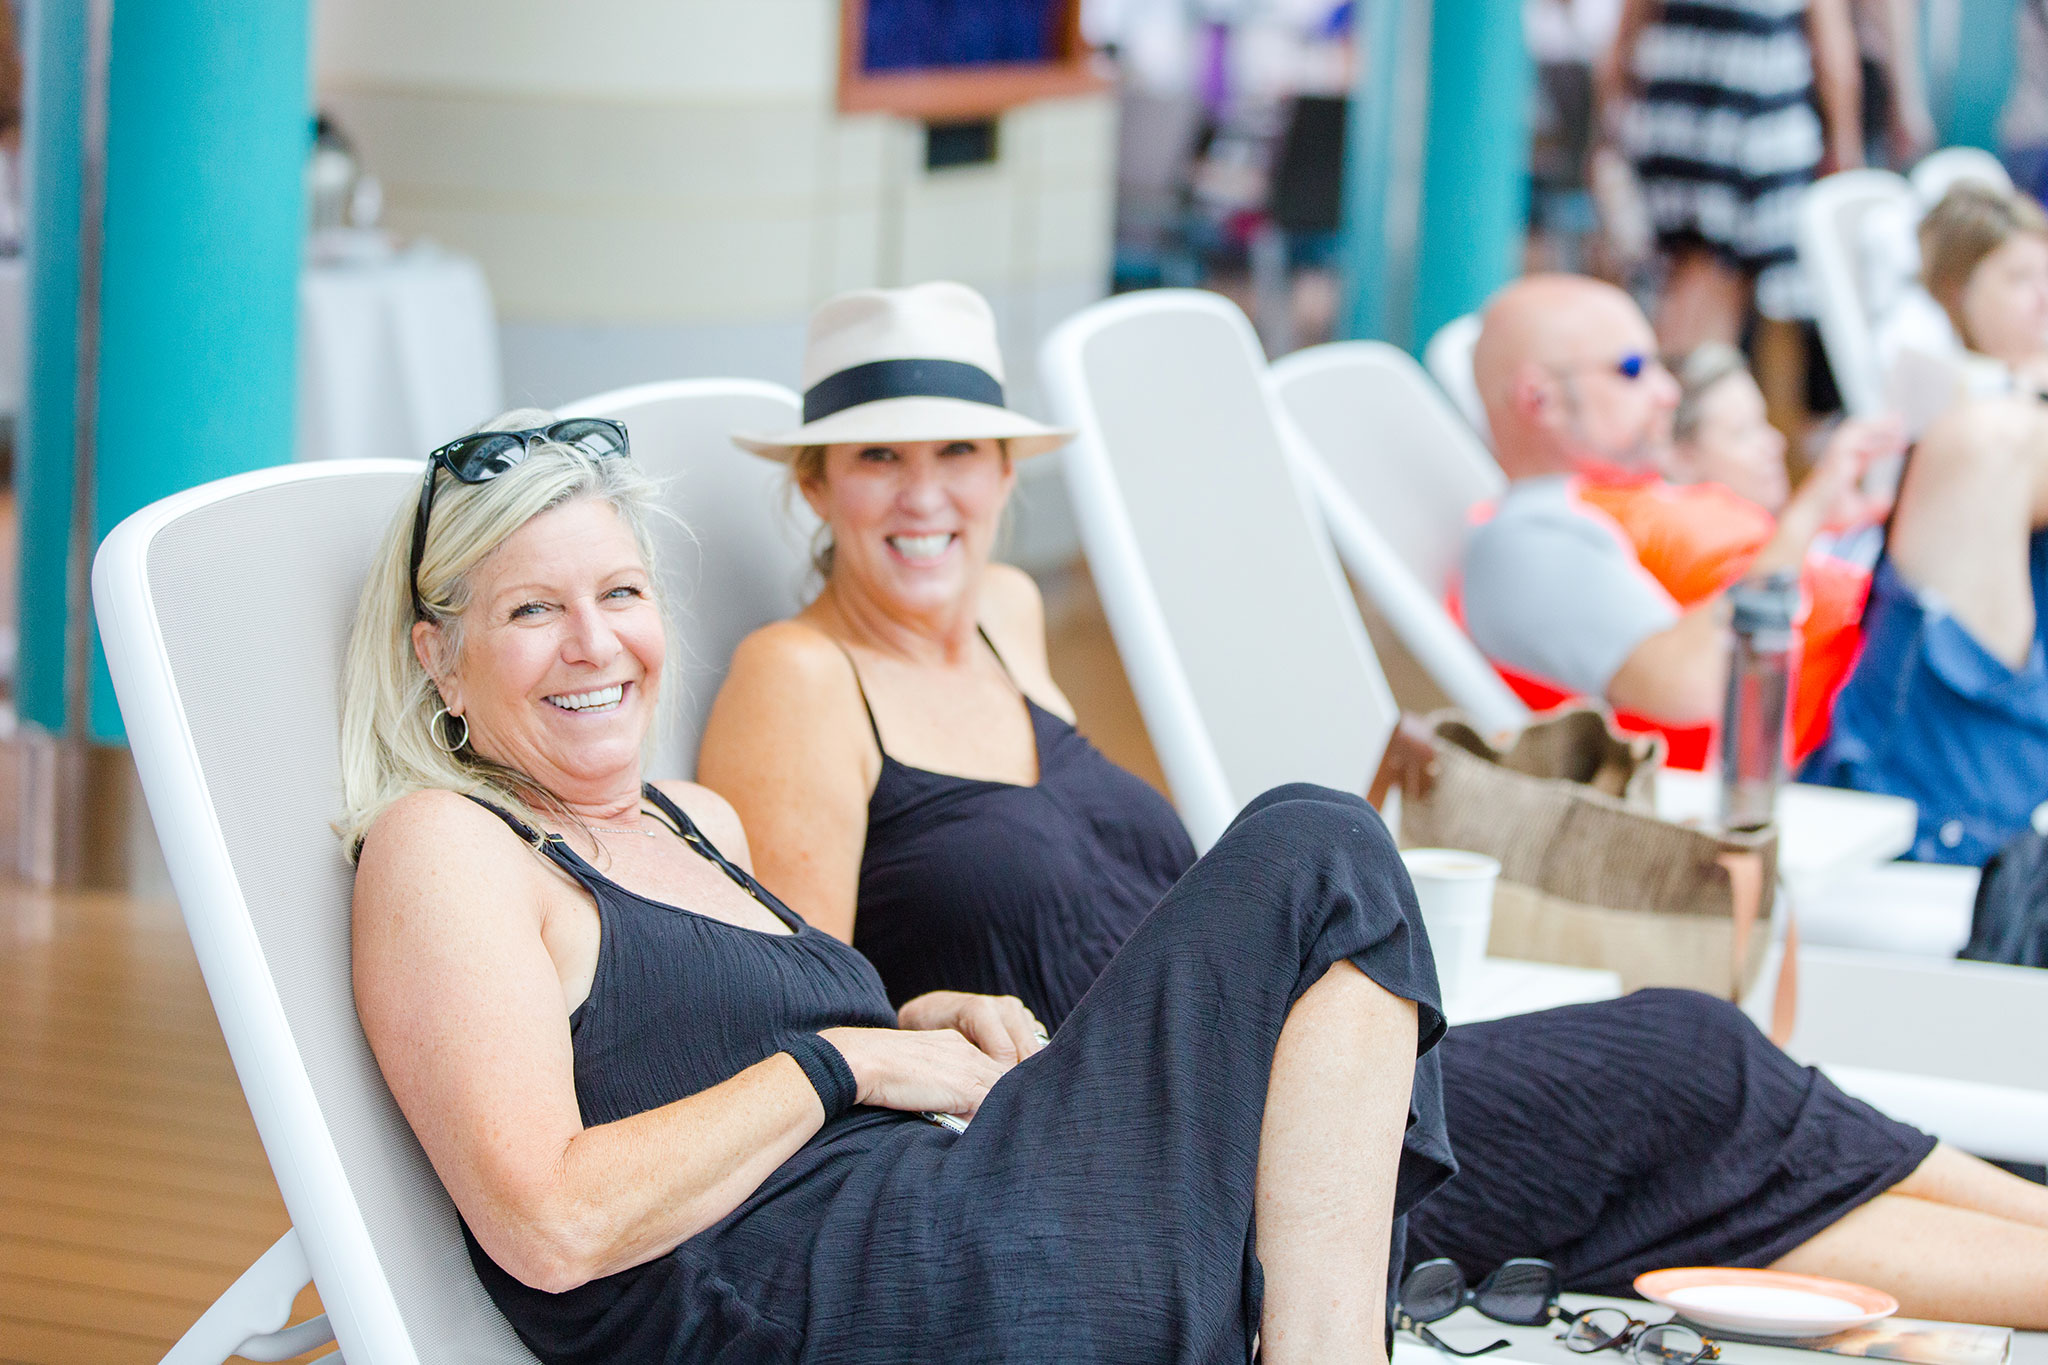 Two women smiling and relaxing on lounge chairs by a poolside; one wearing a black dress and sunglasses on her head, the other in a black dress with a white hat.